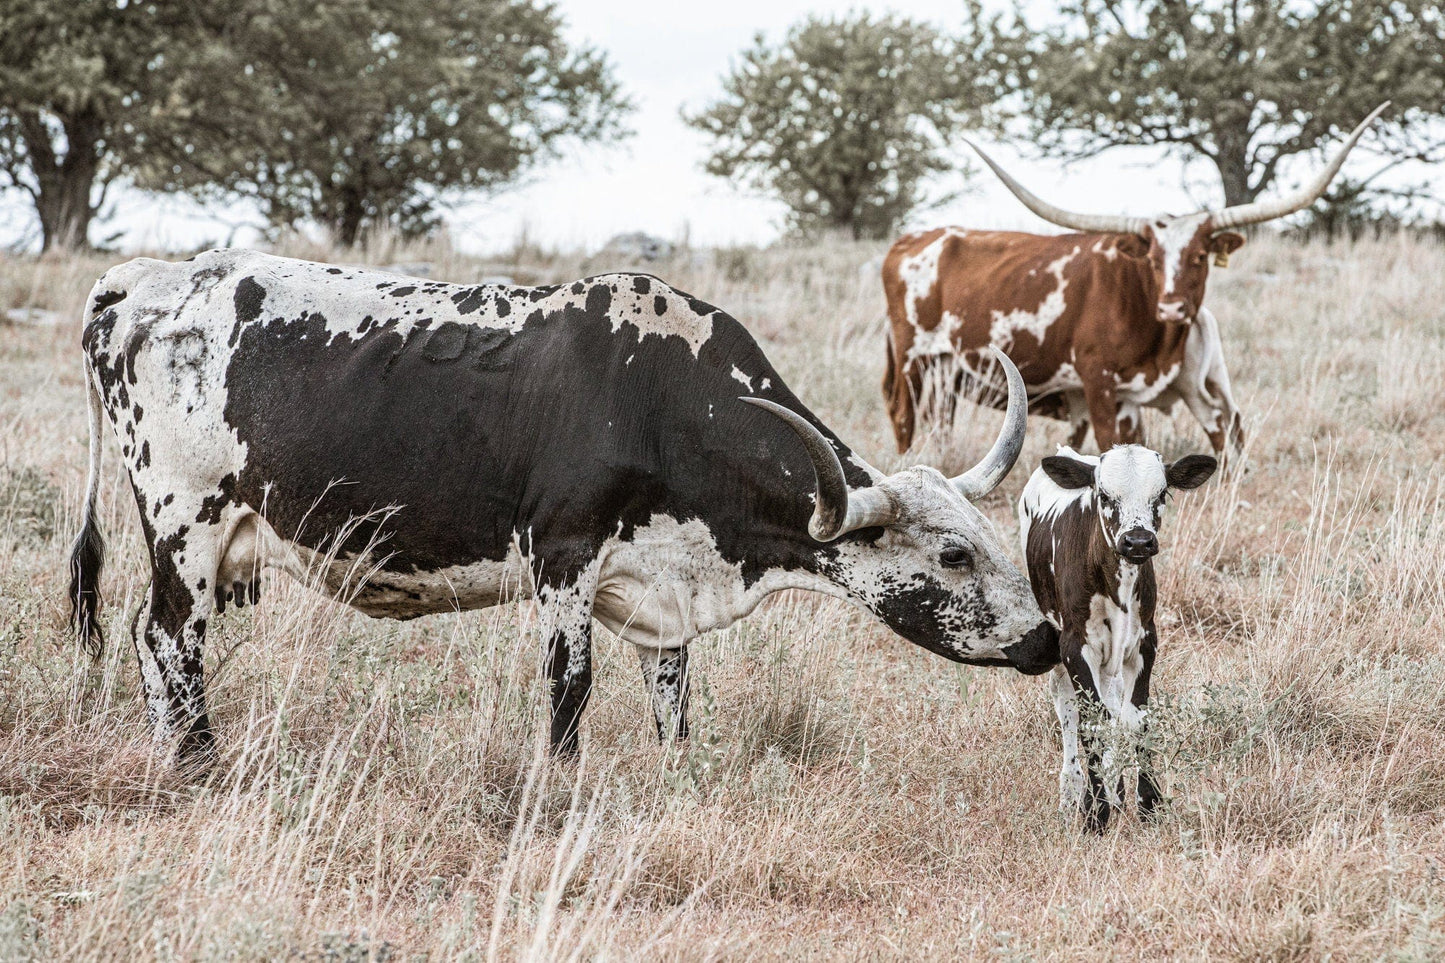 Texas Longhorn Cattle - Cows and Calves Paper Photo Print / 12 x 18 Inches Wall Art Teri James Photography